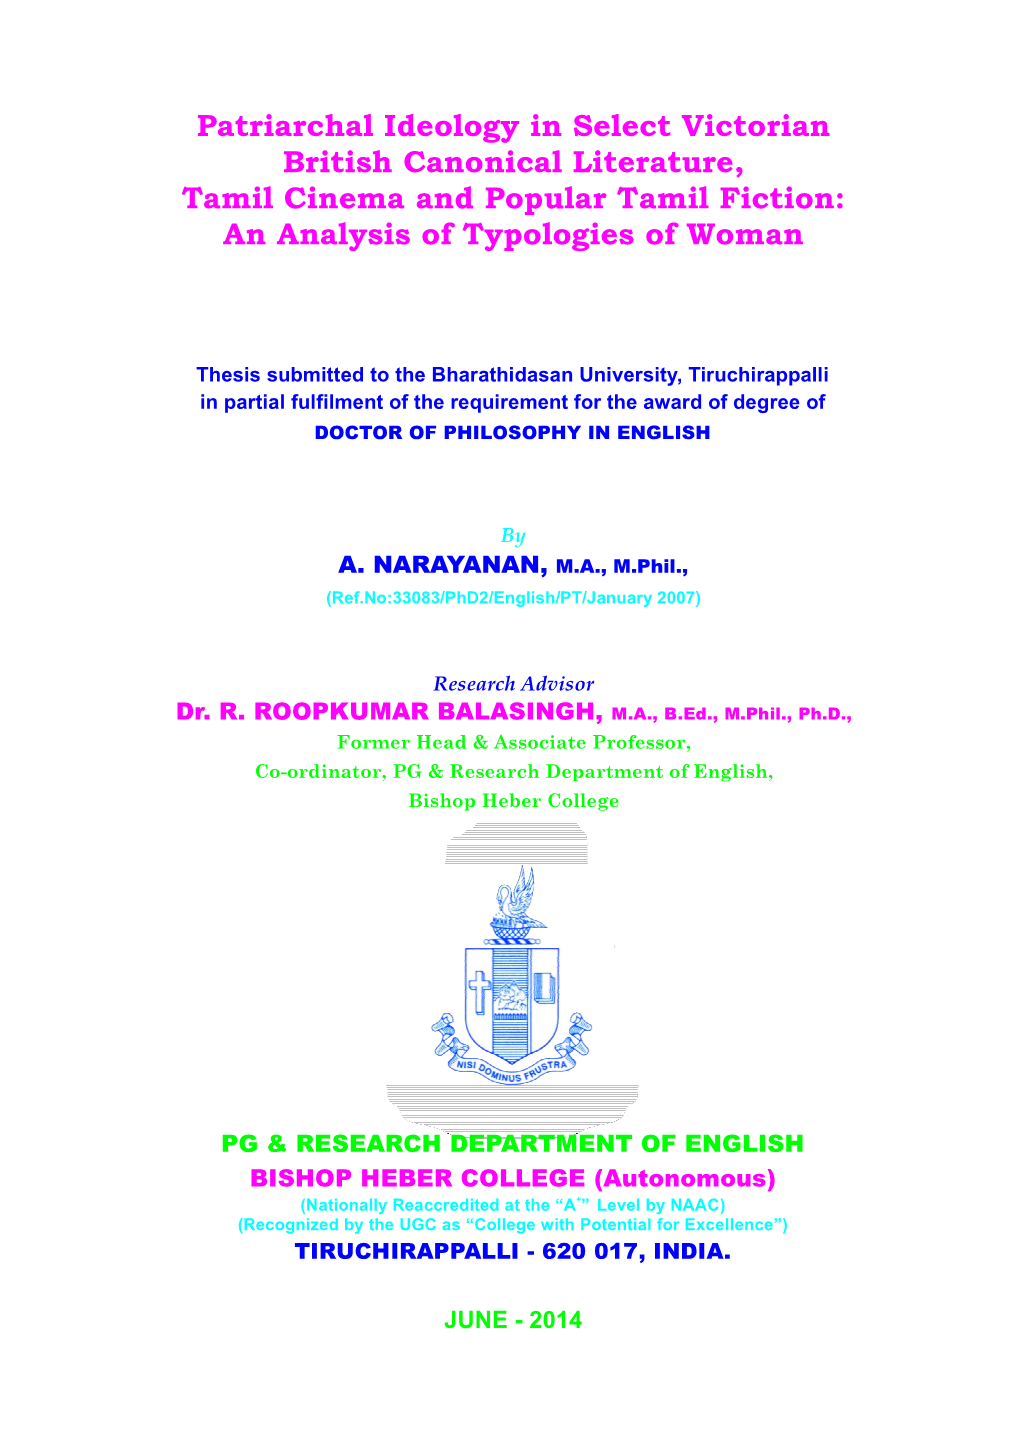 Patriarchal Ideology in Select Victorian British Canonical Literature, Tamil Cinema and Popular Tamil Fiction: an Analysis of Typologies of Woman